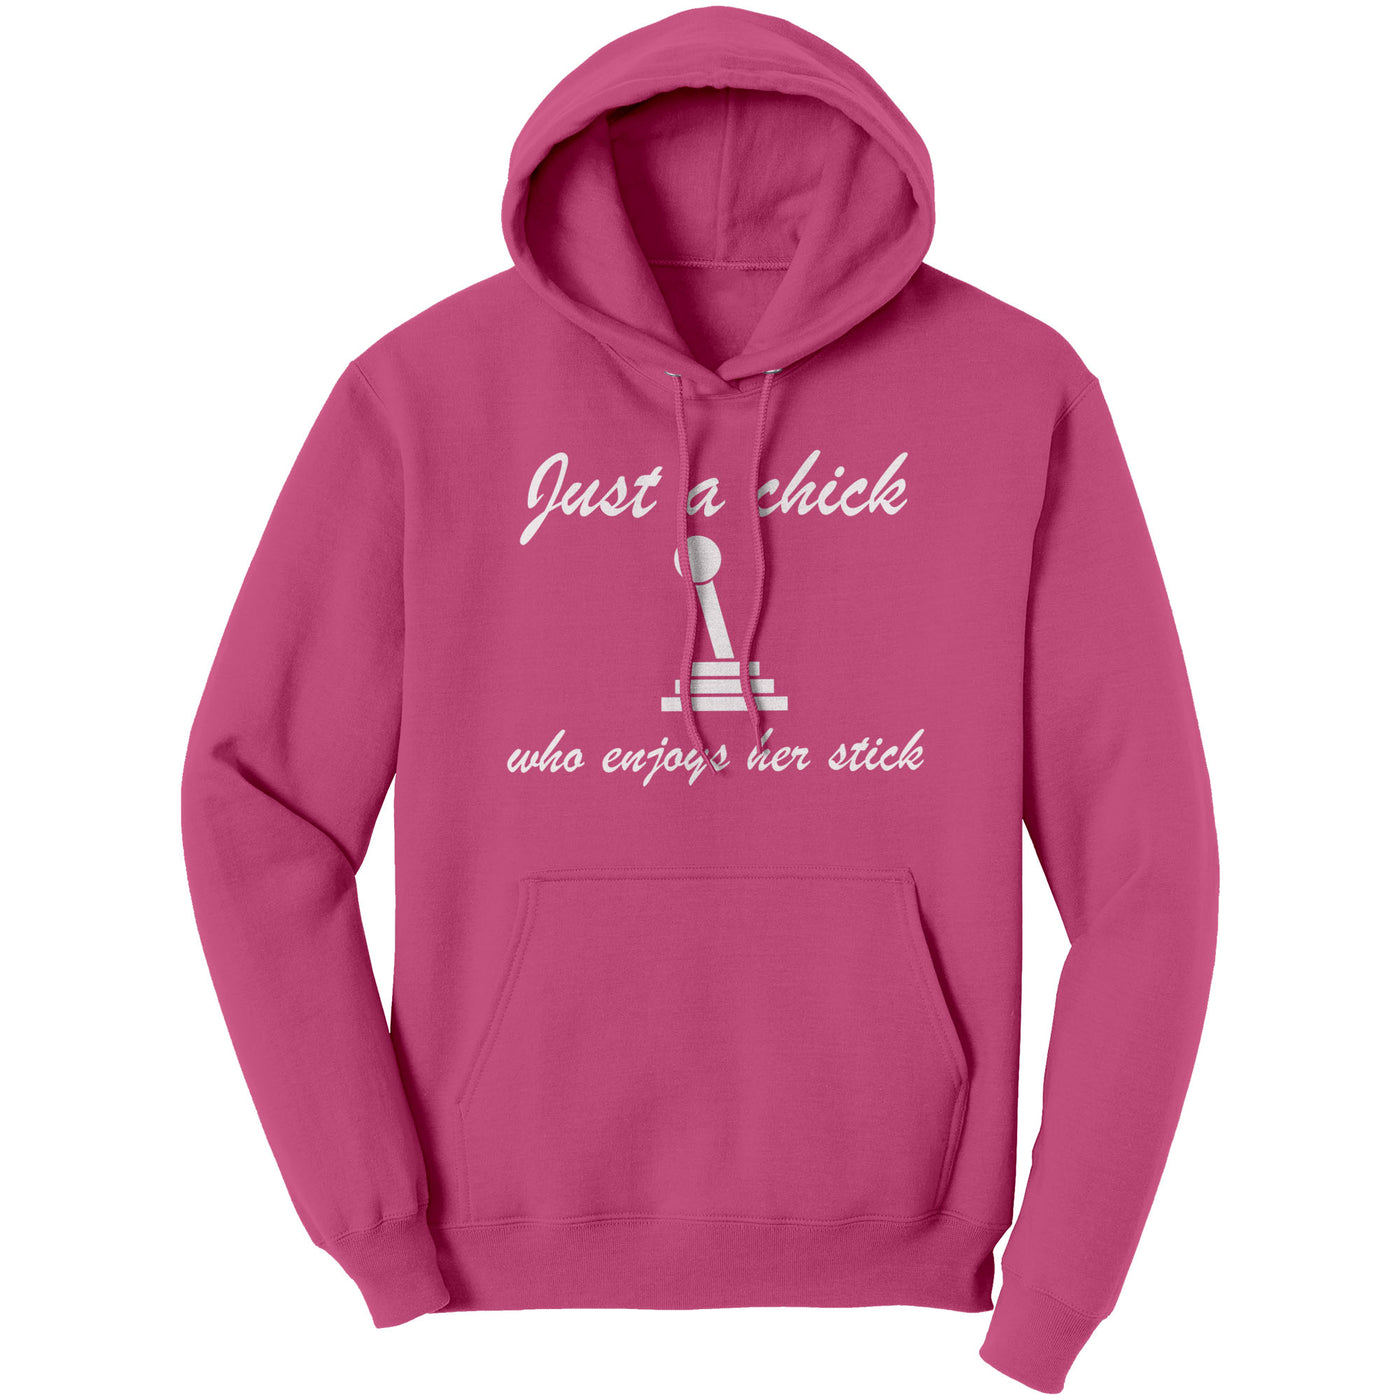 just-a-chick-who-enjoys-her-stick-hoodie-pink